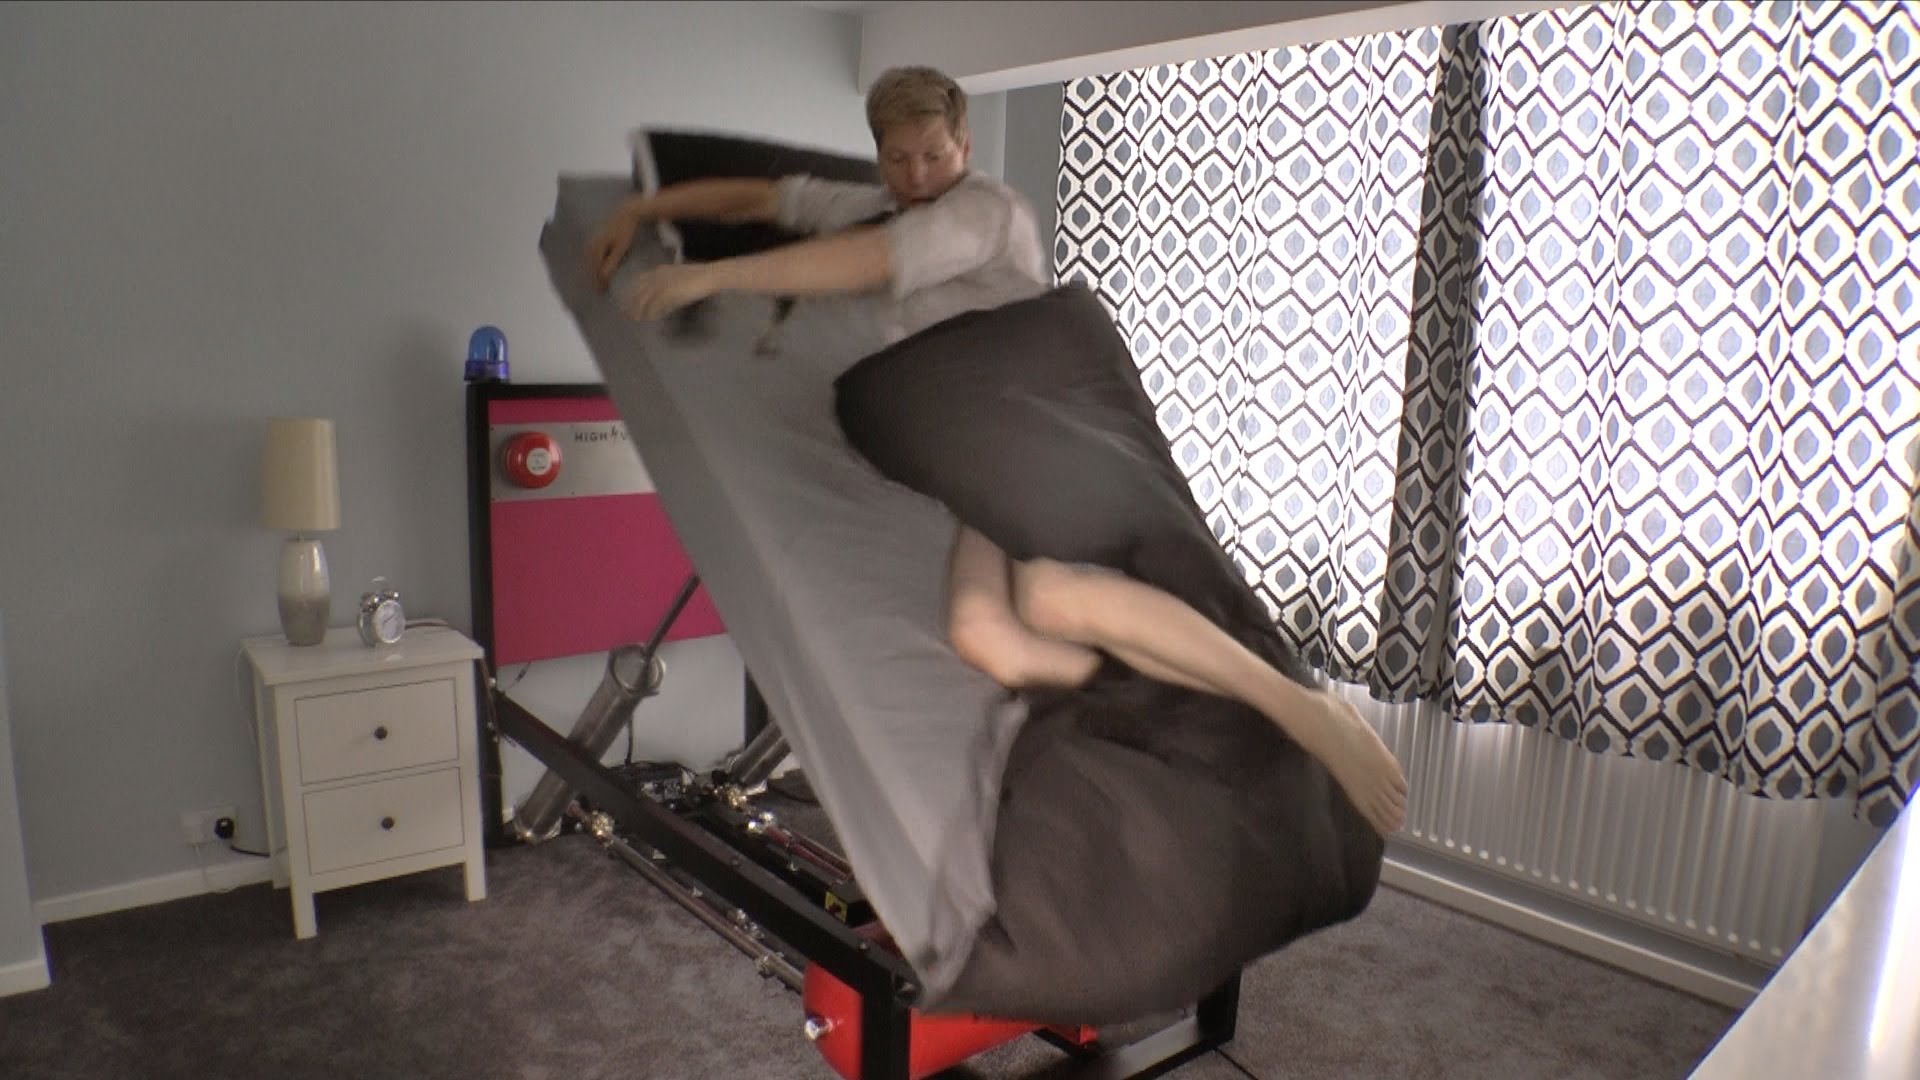 This Insane Bed Actually LAUNCHES You Into The Air In The Morning